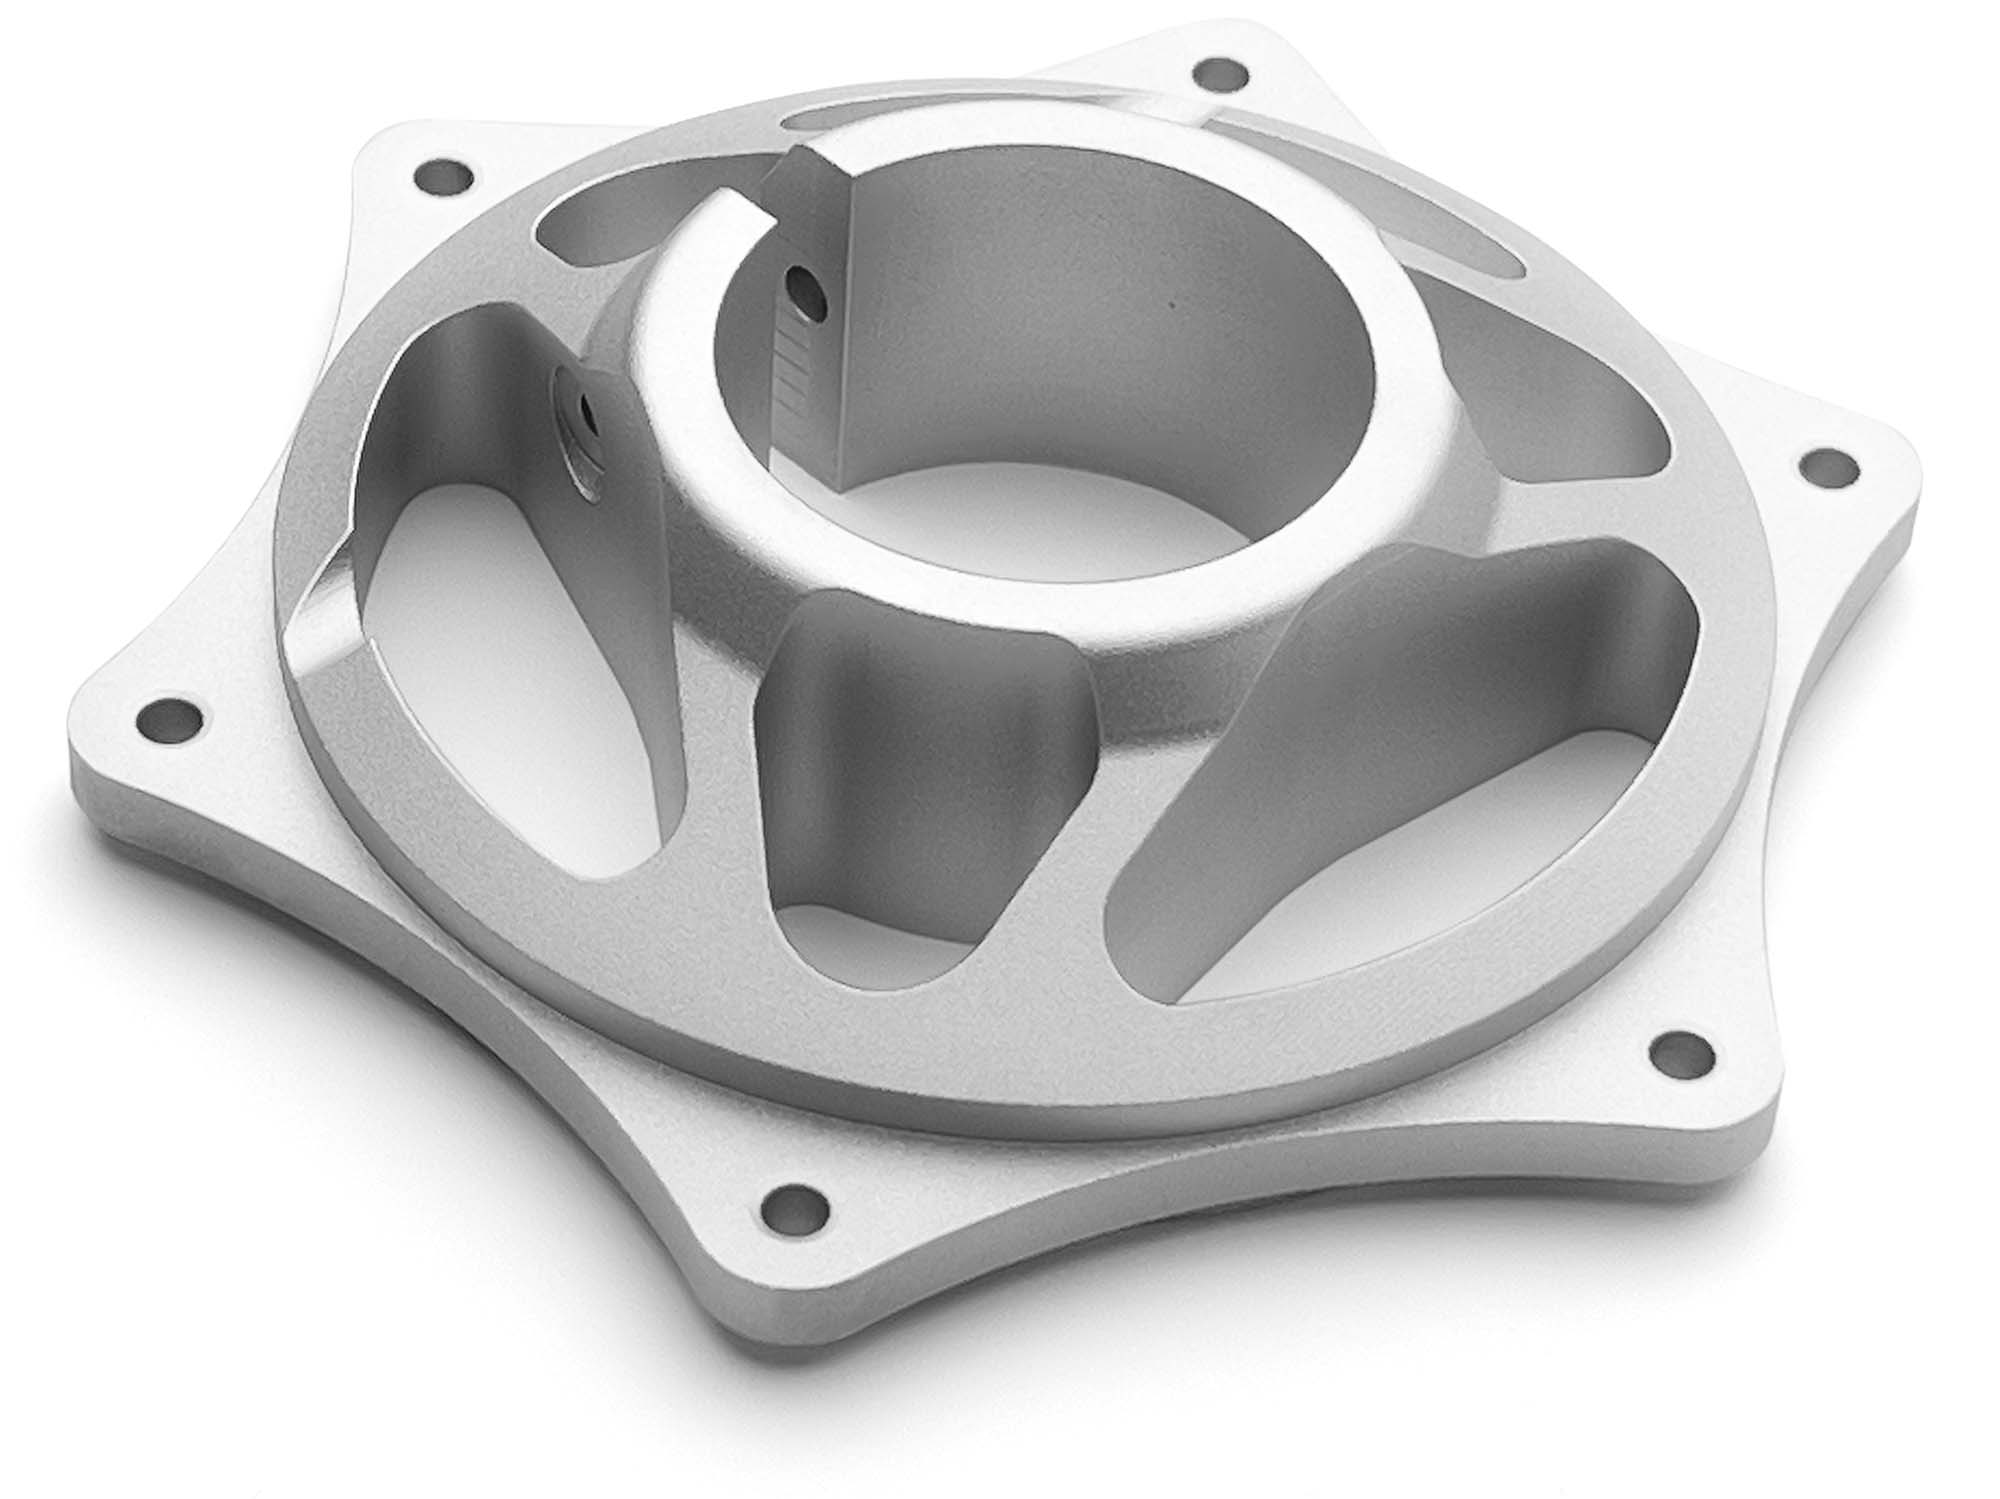 Sample part made with precision CNC machining of aluminium 7075-T651 at Weerg